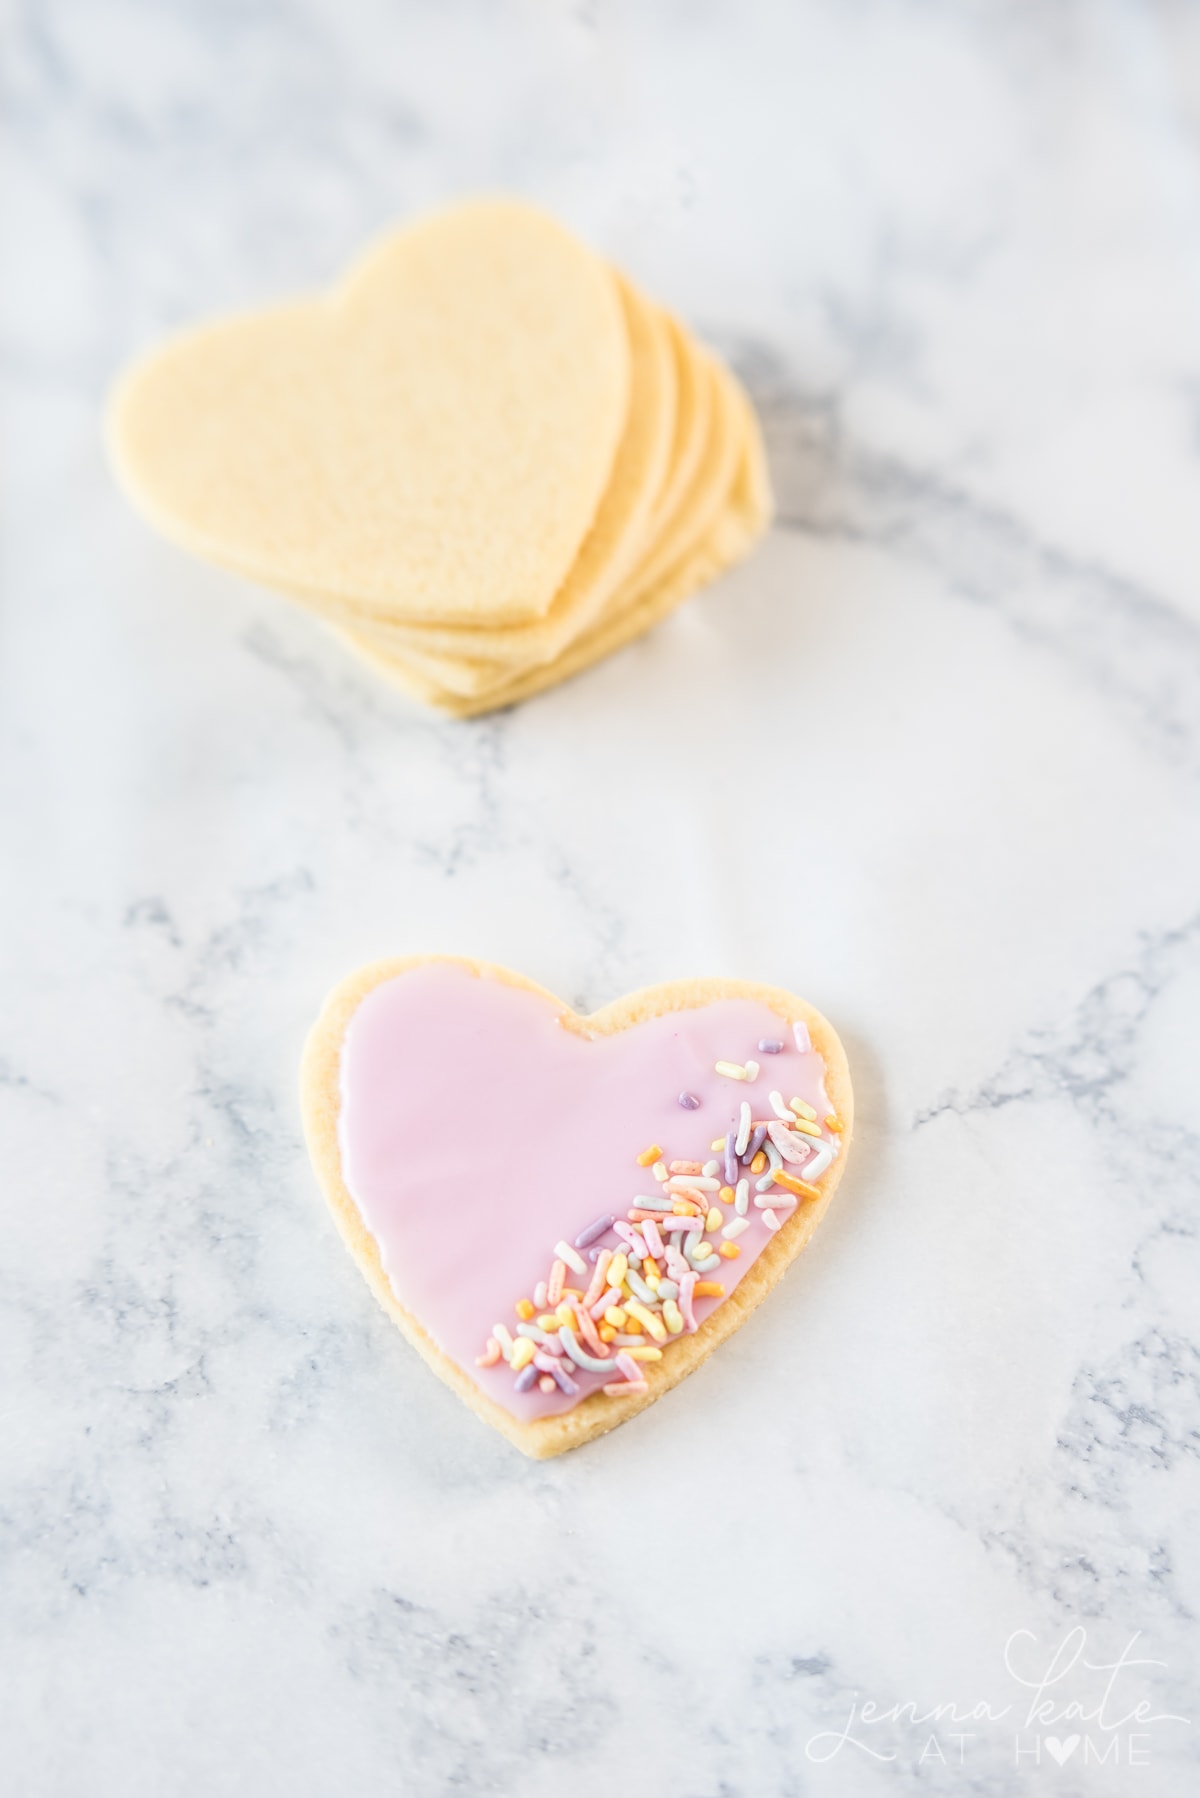 Frosted cut out sugar cookies